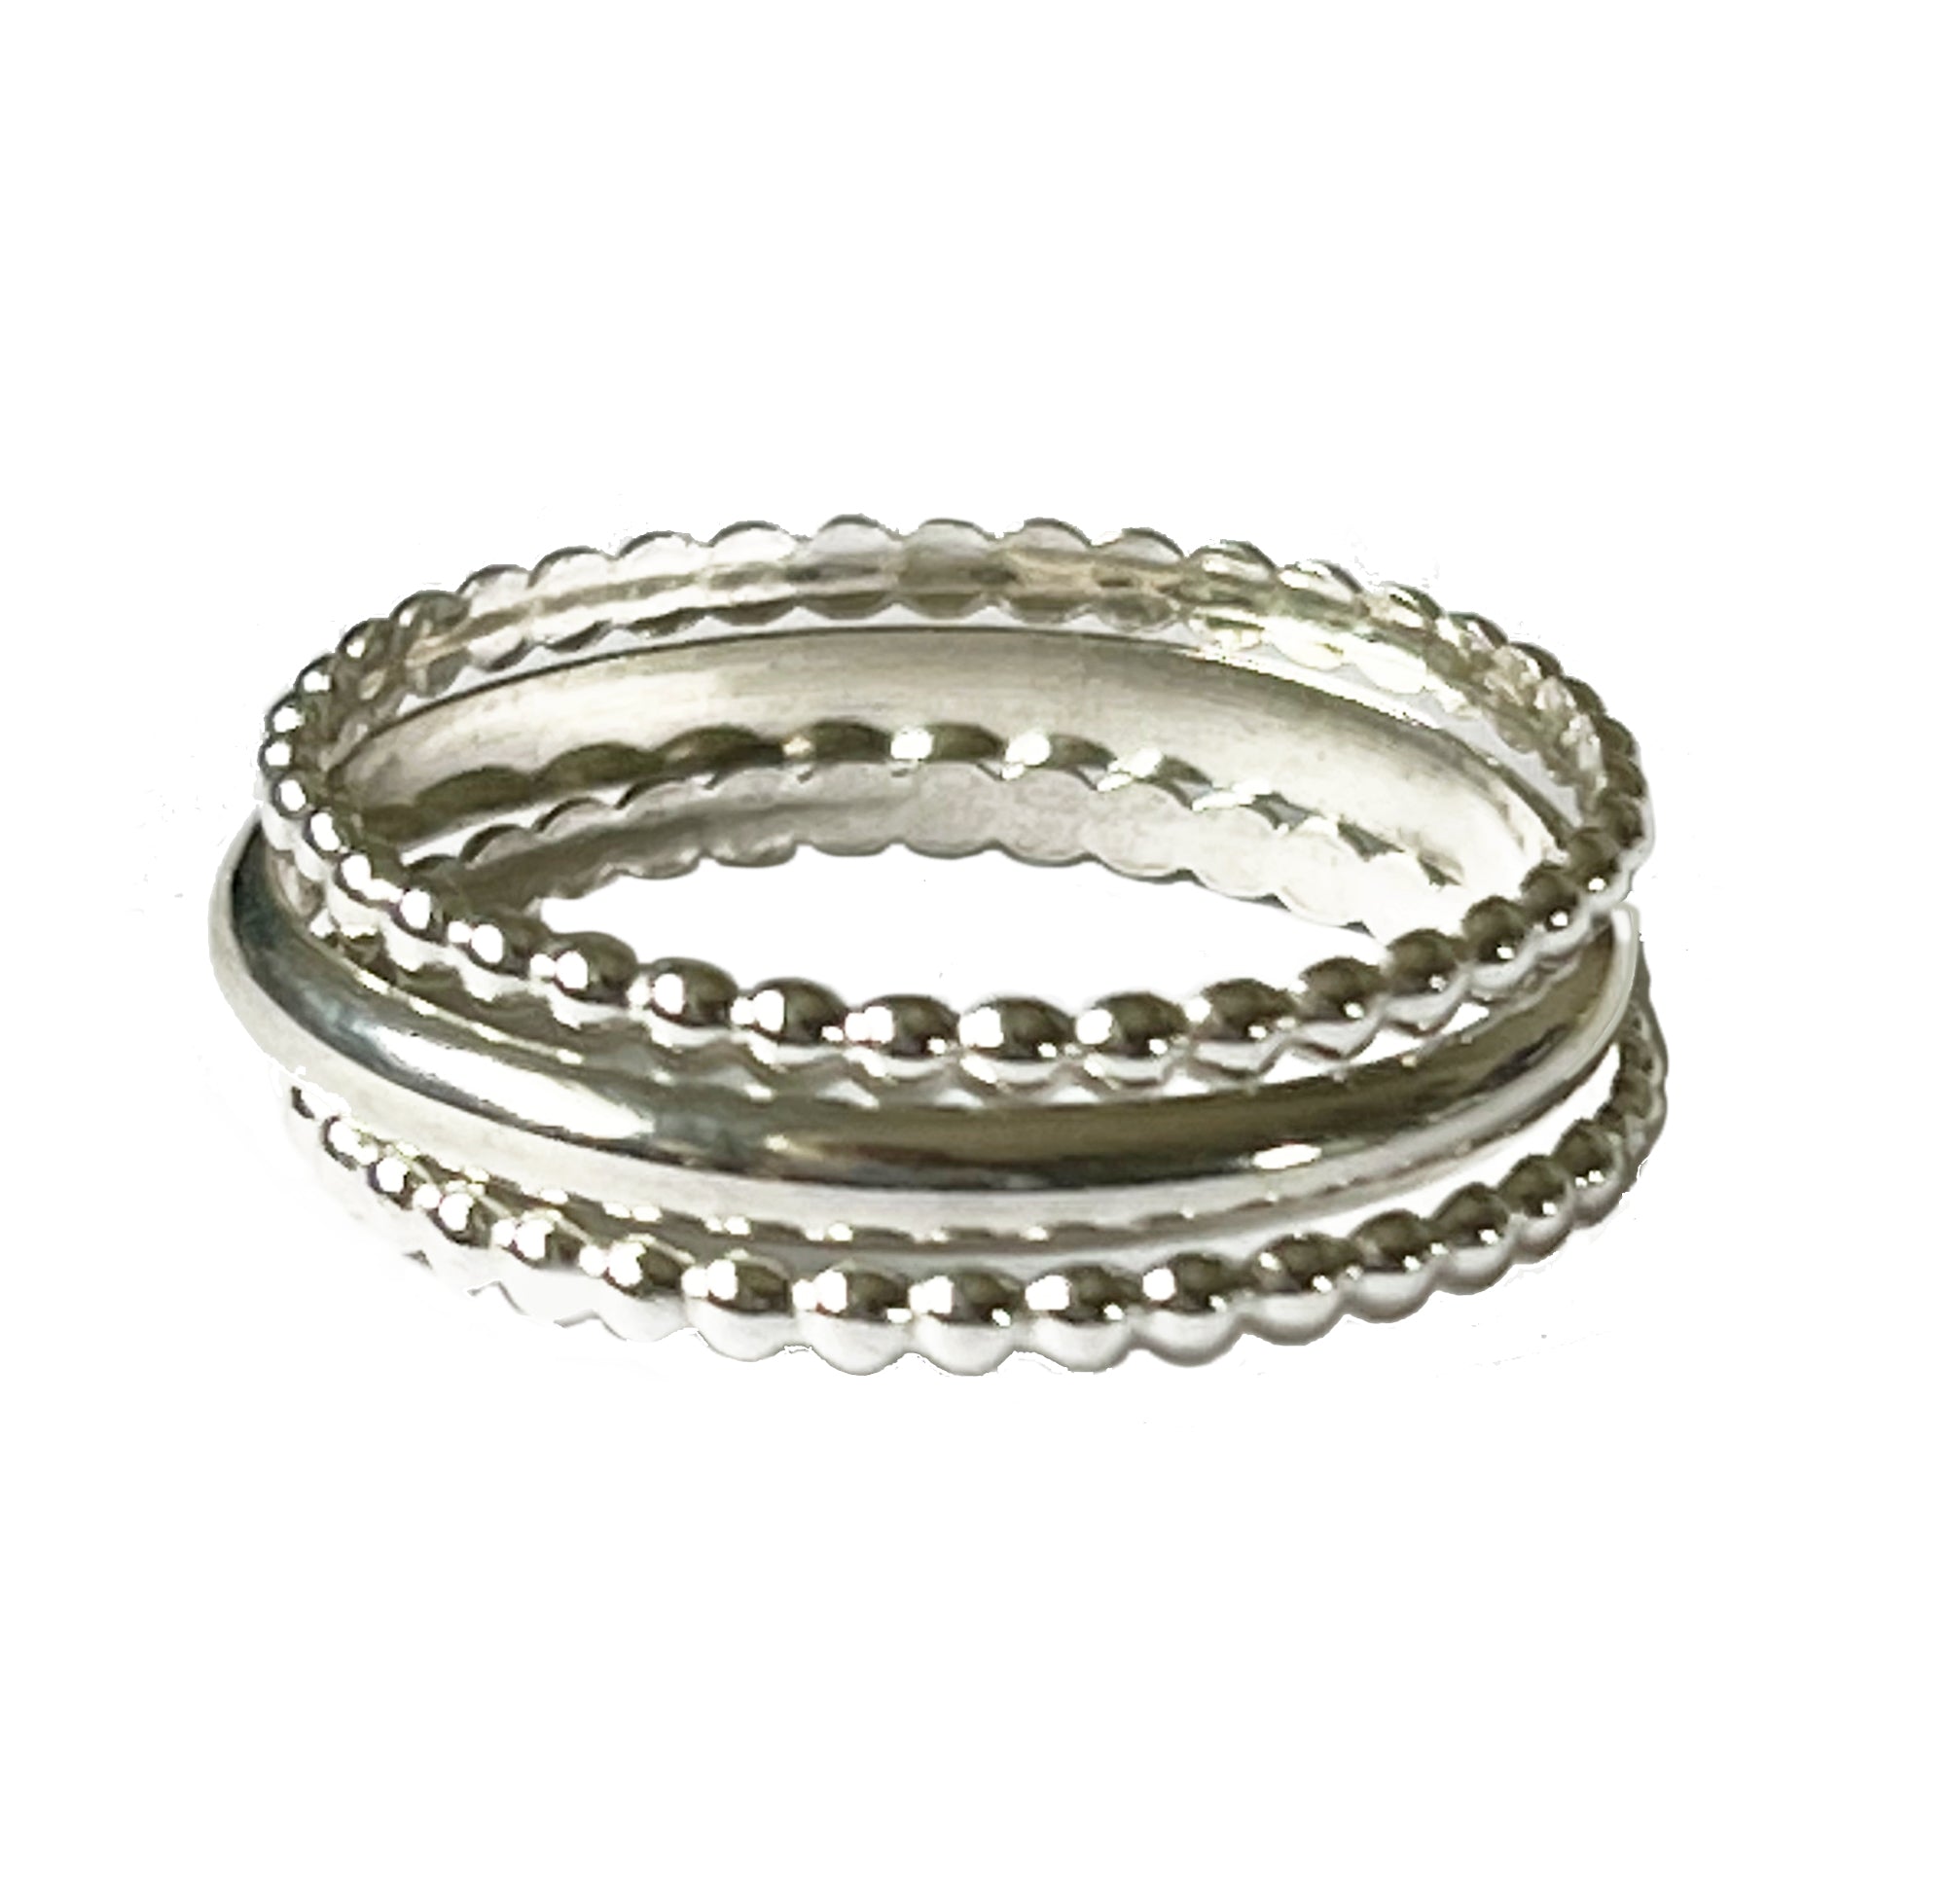 Tiny dainty stacking ring Sterling silver stackable ring Statement ring  Small — Discovered